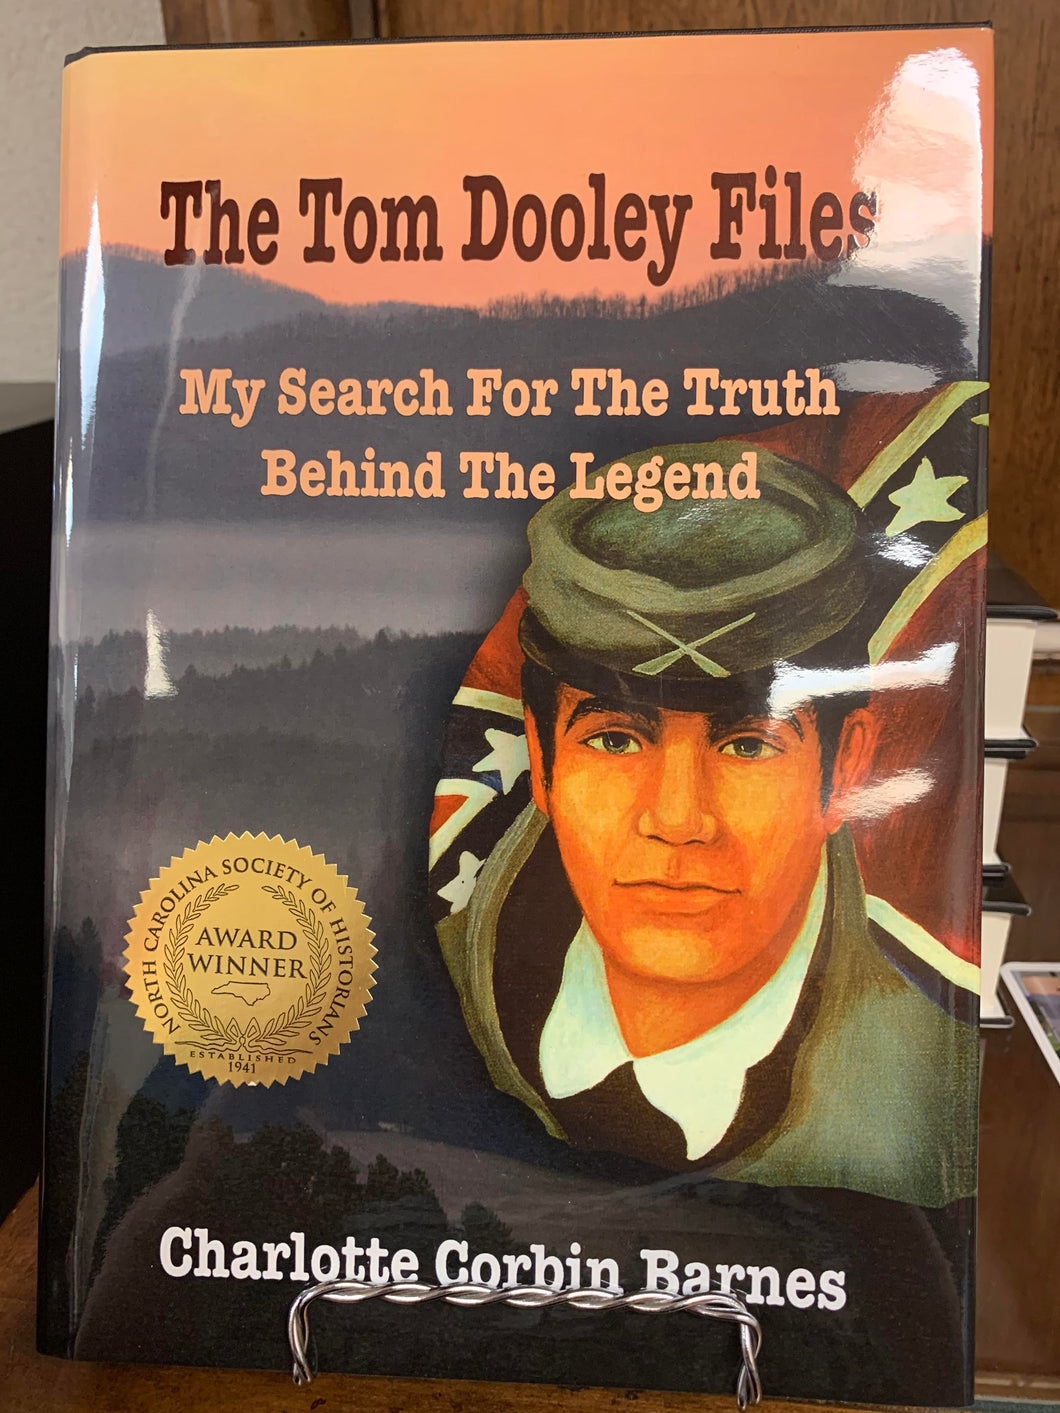 The Tom Dooley Files: My Search for the Truth Behind the Legend by Charlotte Corbin Barnes